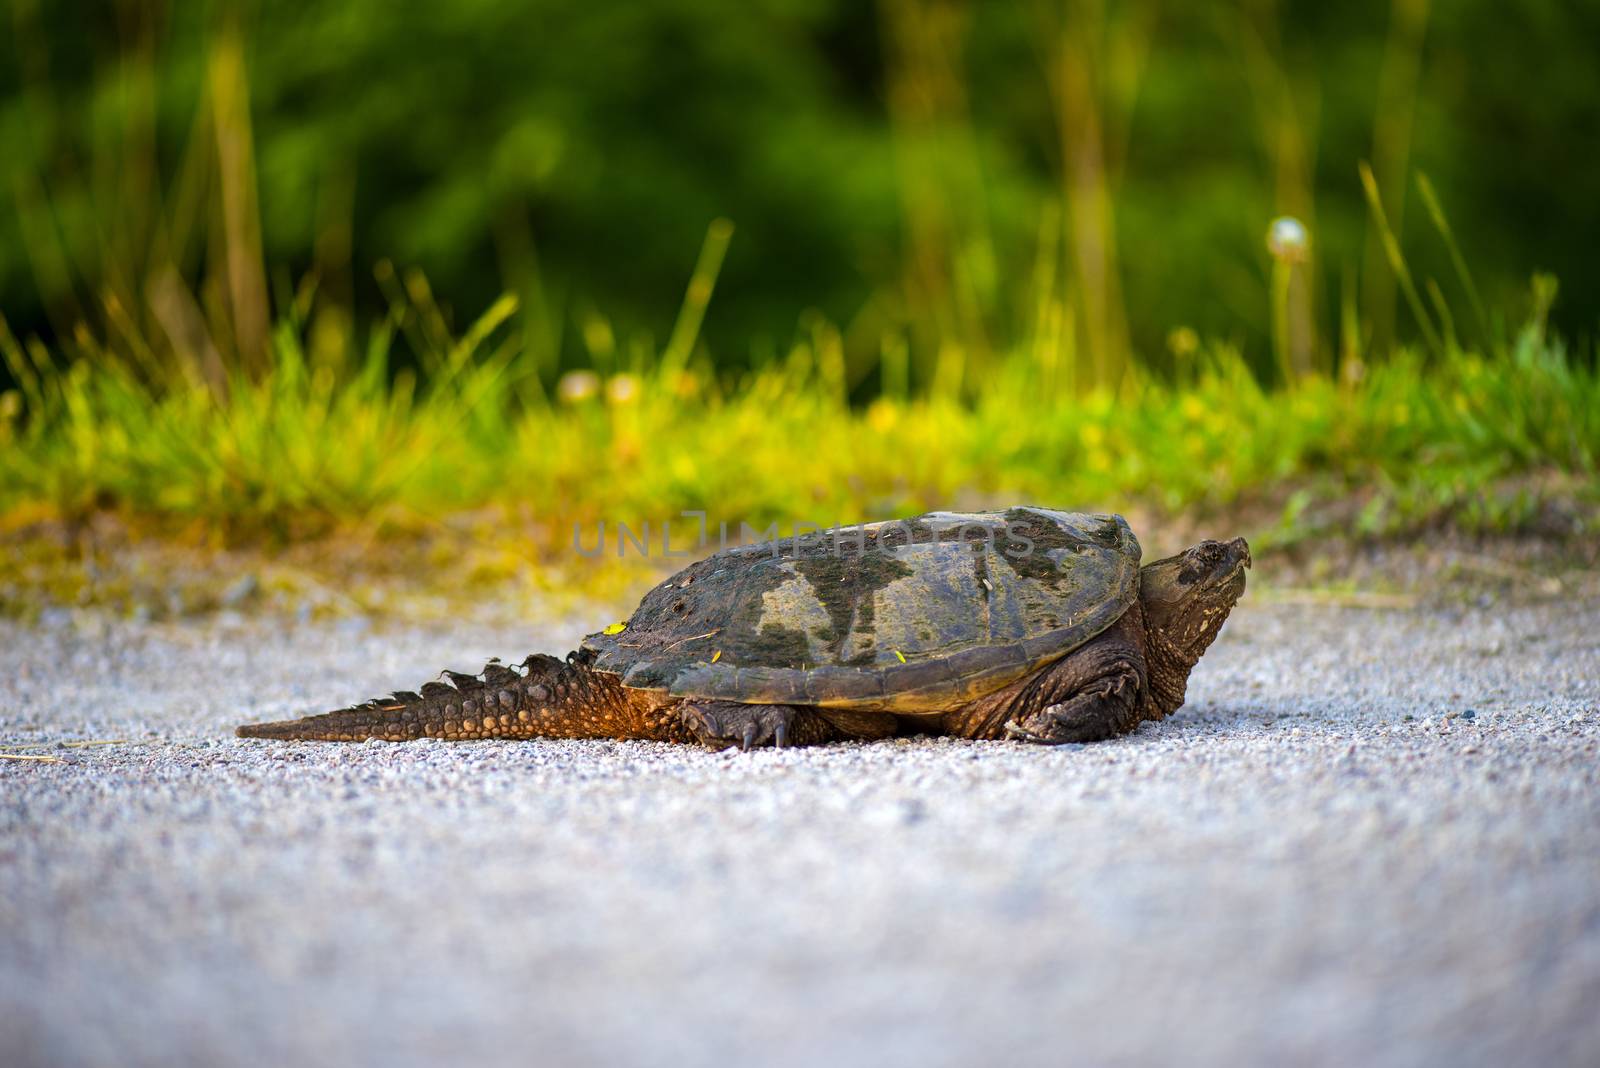 Close Encounter with an common snapping turtle on a sunny day